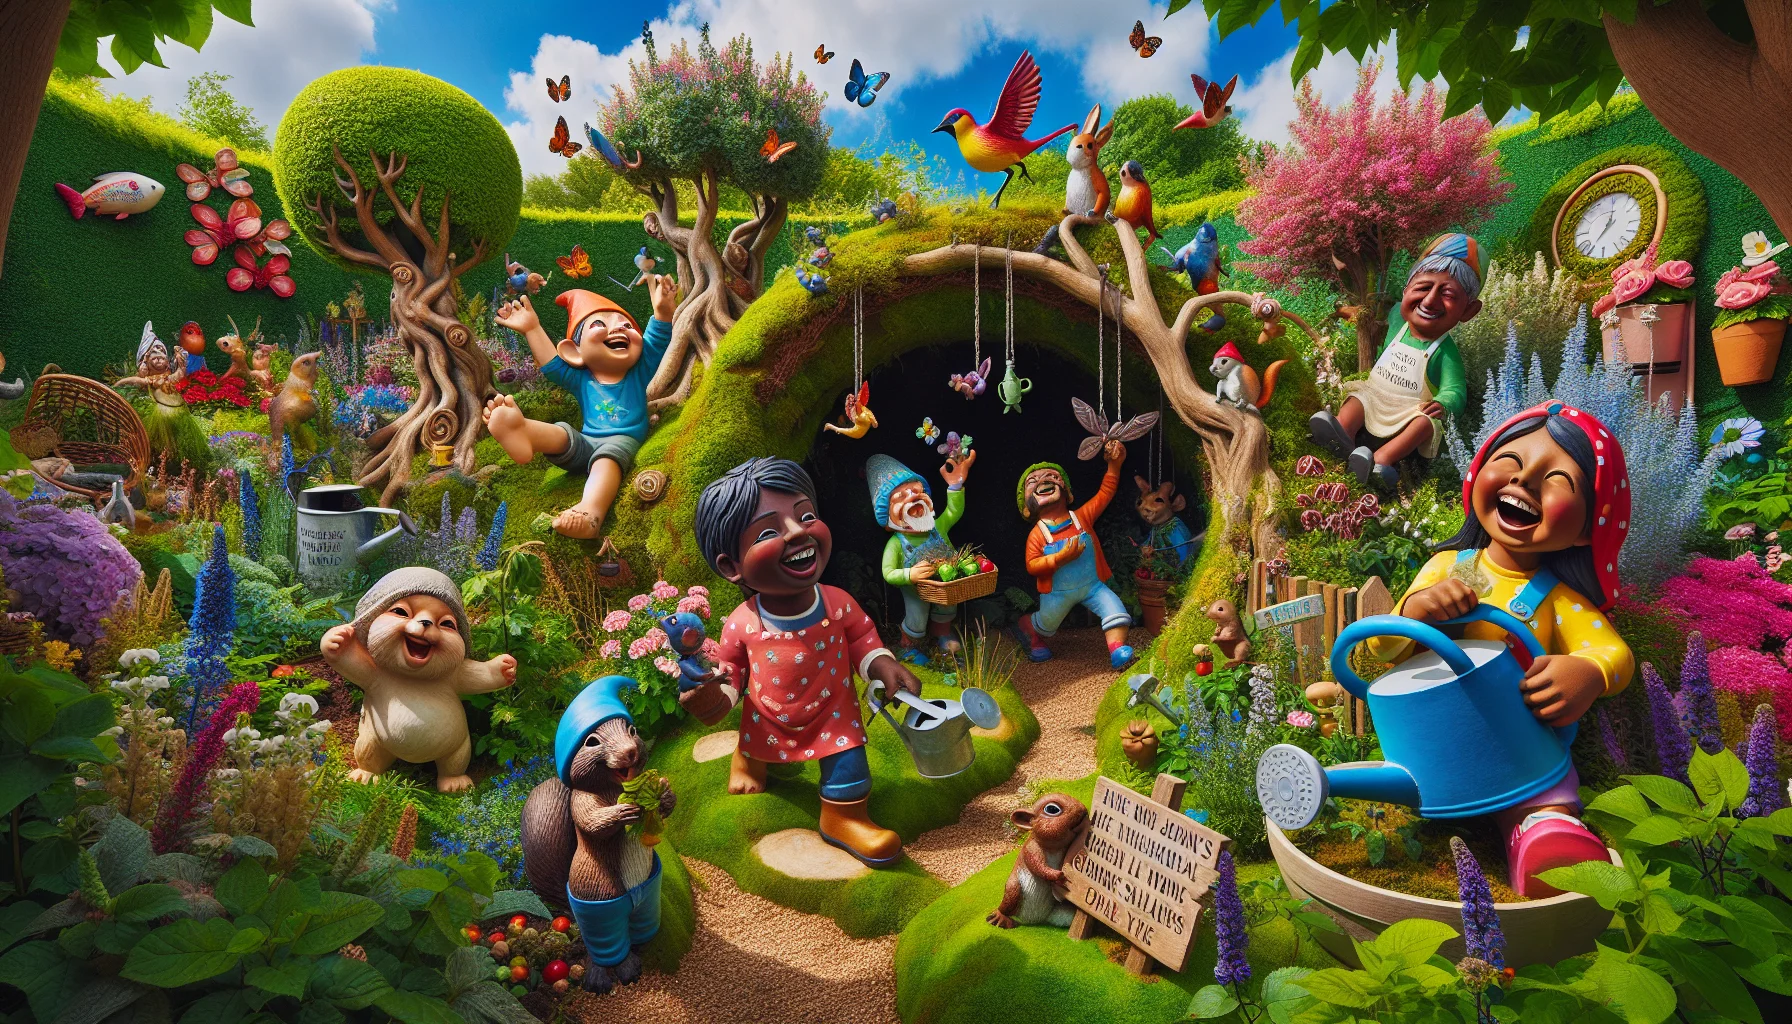 Create a vibrant scene of a hidden hollow in a garden, adorned with quirky and whimsical sculptures and installations. Include garden gnomes engaged in humorous antics like chasing butterflies or swinging on vines, mischievous squirrels playing with watering cans, and funny signs with enjoyable gardening puns. Show a South Asian man laughing while holding a trowel, a Hispanic woman chuckling whilst pruning a shrub, and a Black child grinning widely, hands filled with fresh berries. Let the luscious greenery, blossoming flowers, and the blue sky serve as a comforting background, persuading onlookers of the joy of gardening.